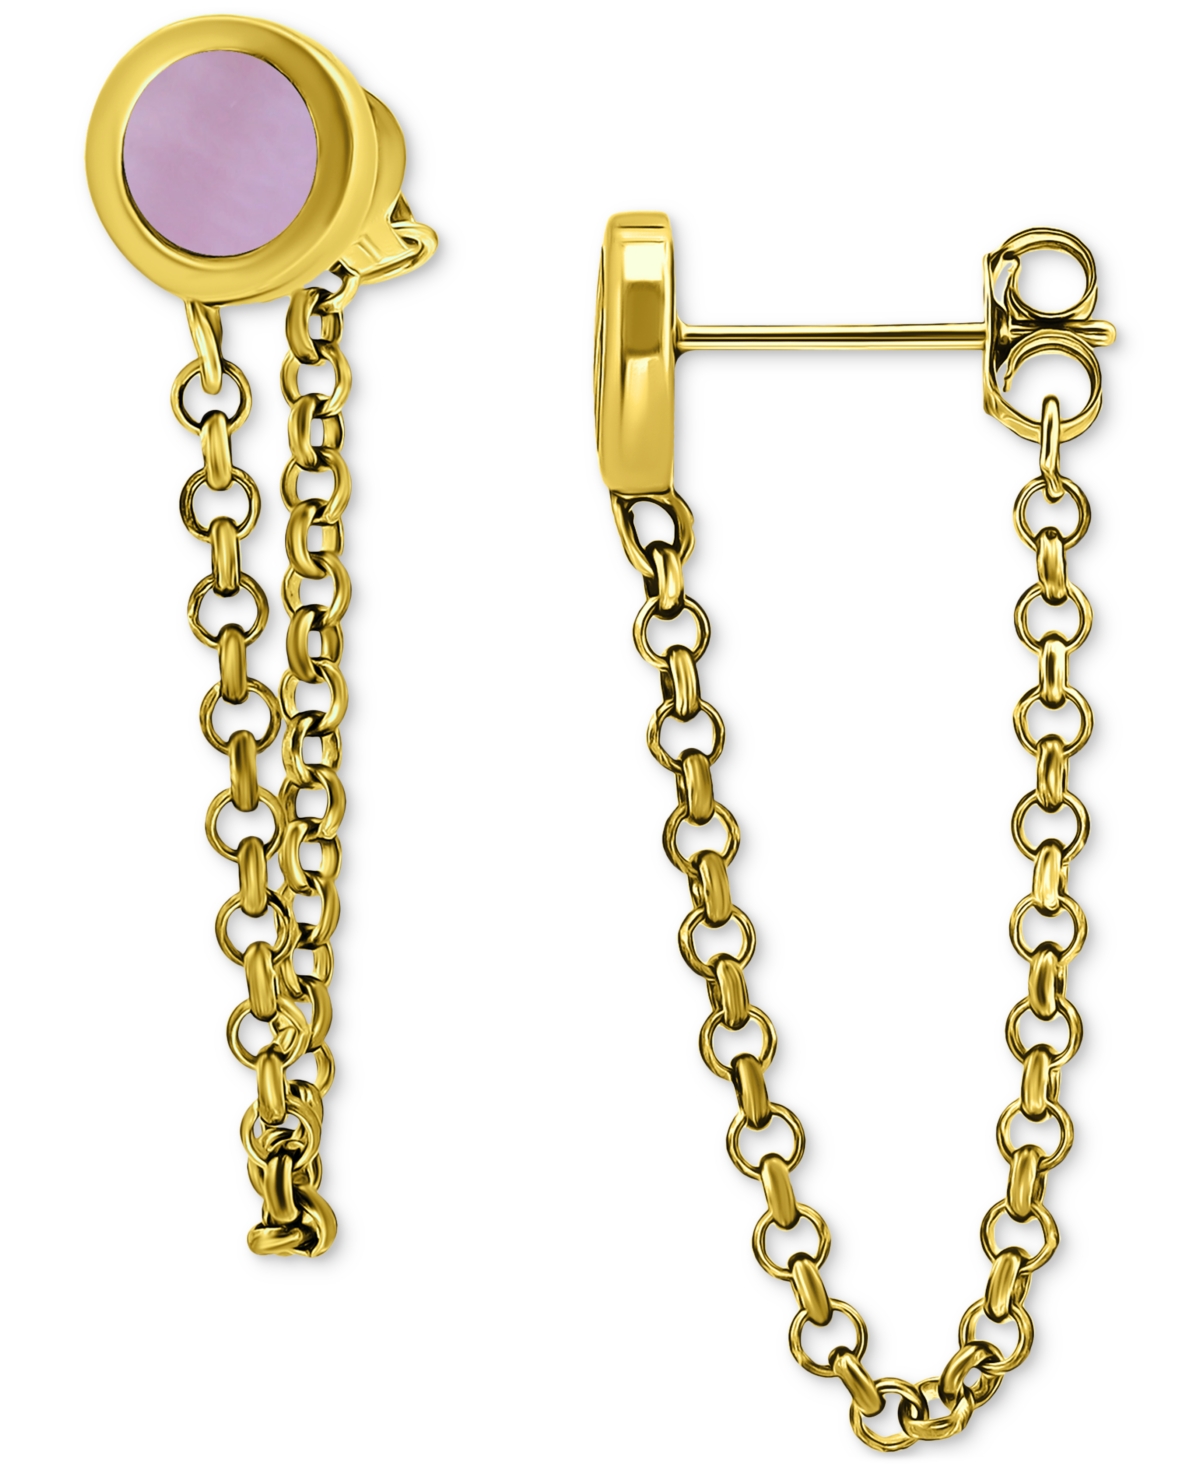 Giani Bernini Abalone Chain Front And Back Drop Earrings In 18k Gold-plated Sterling Silver (also In Pink Shell),